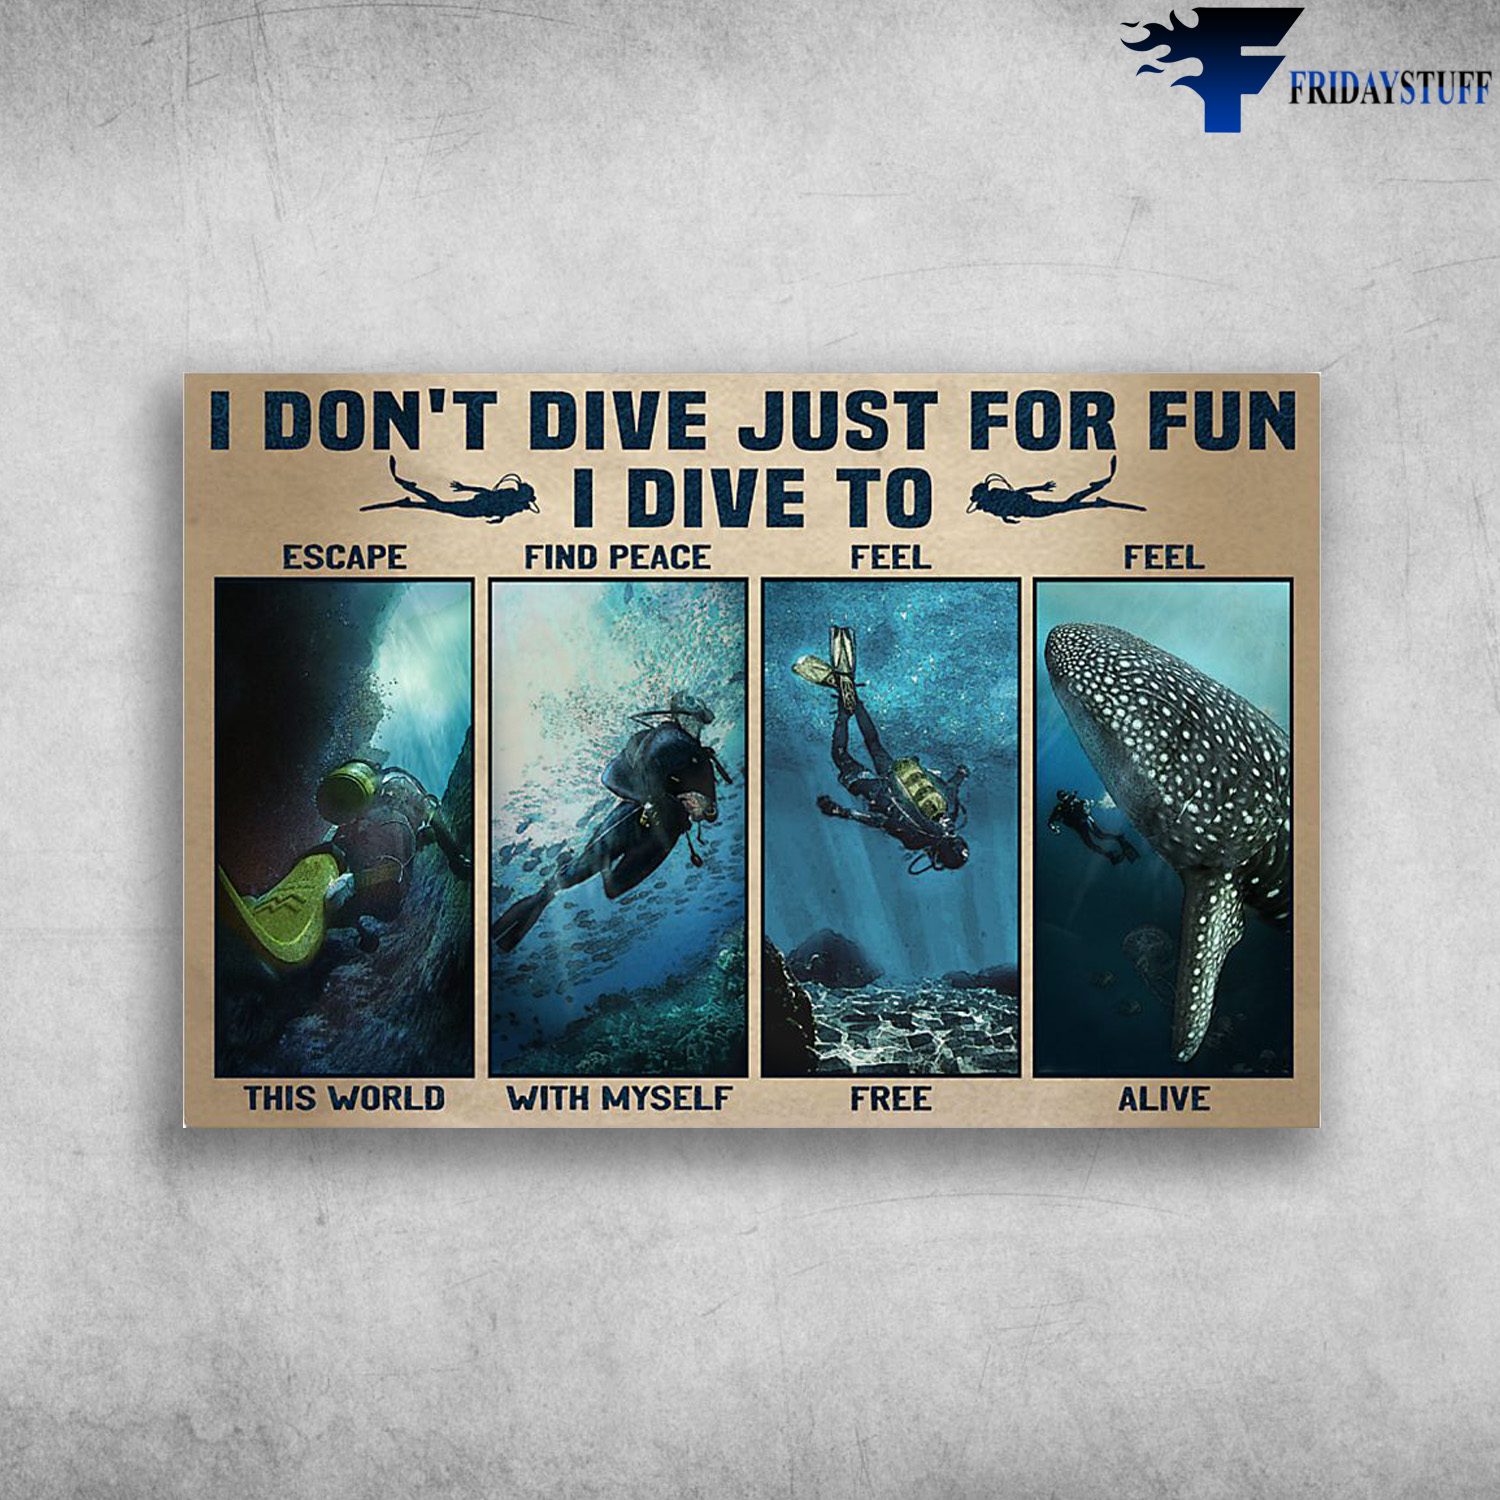 Scuba Diving - Don't Dive Just For Fun, I Dive To Escape This World, Find Peace With Myself, Feel Free, Feel Alive, Whale Shark